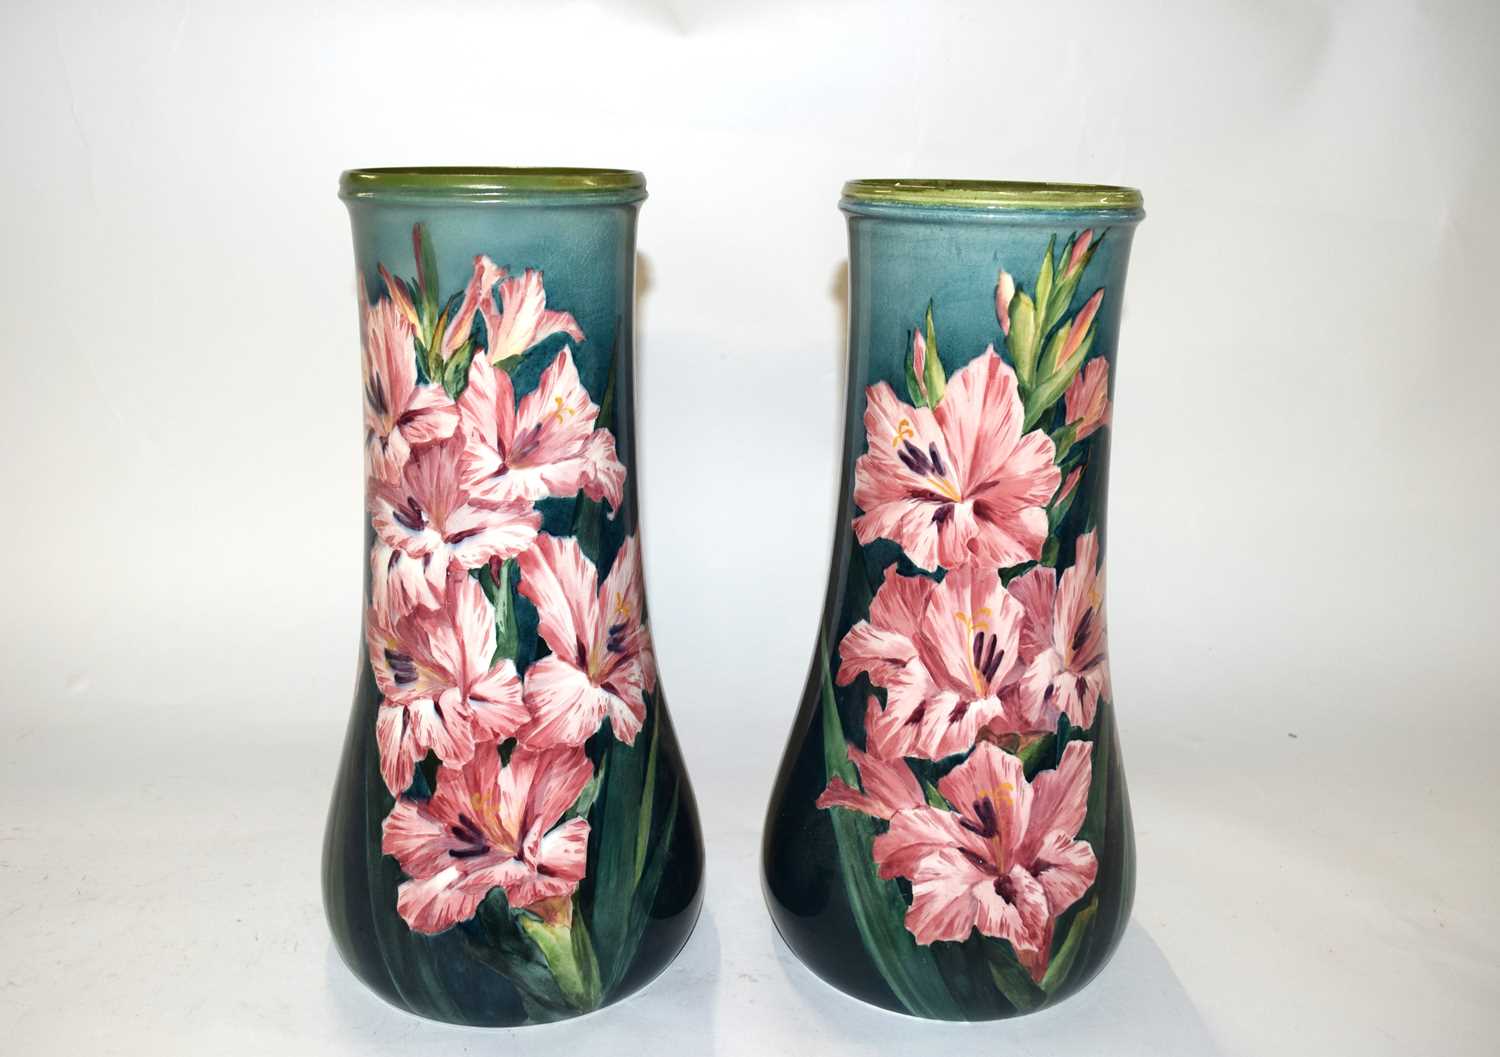 A pair of 19th Century Lambeth Faience vases decorated with pink flowers on green ground by Katie